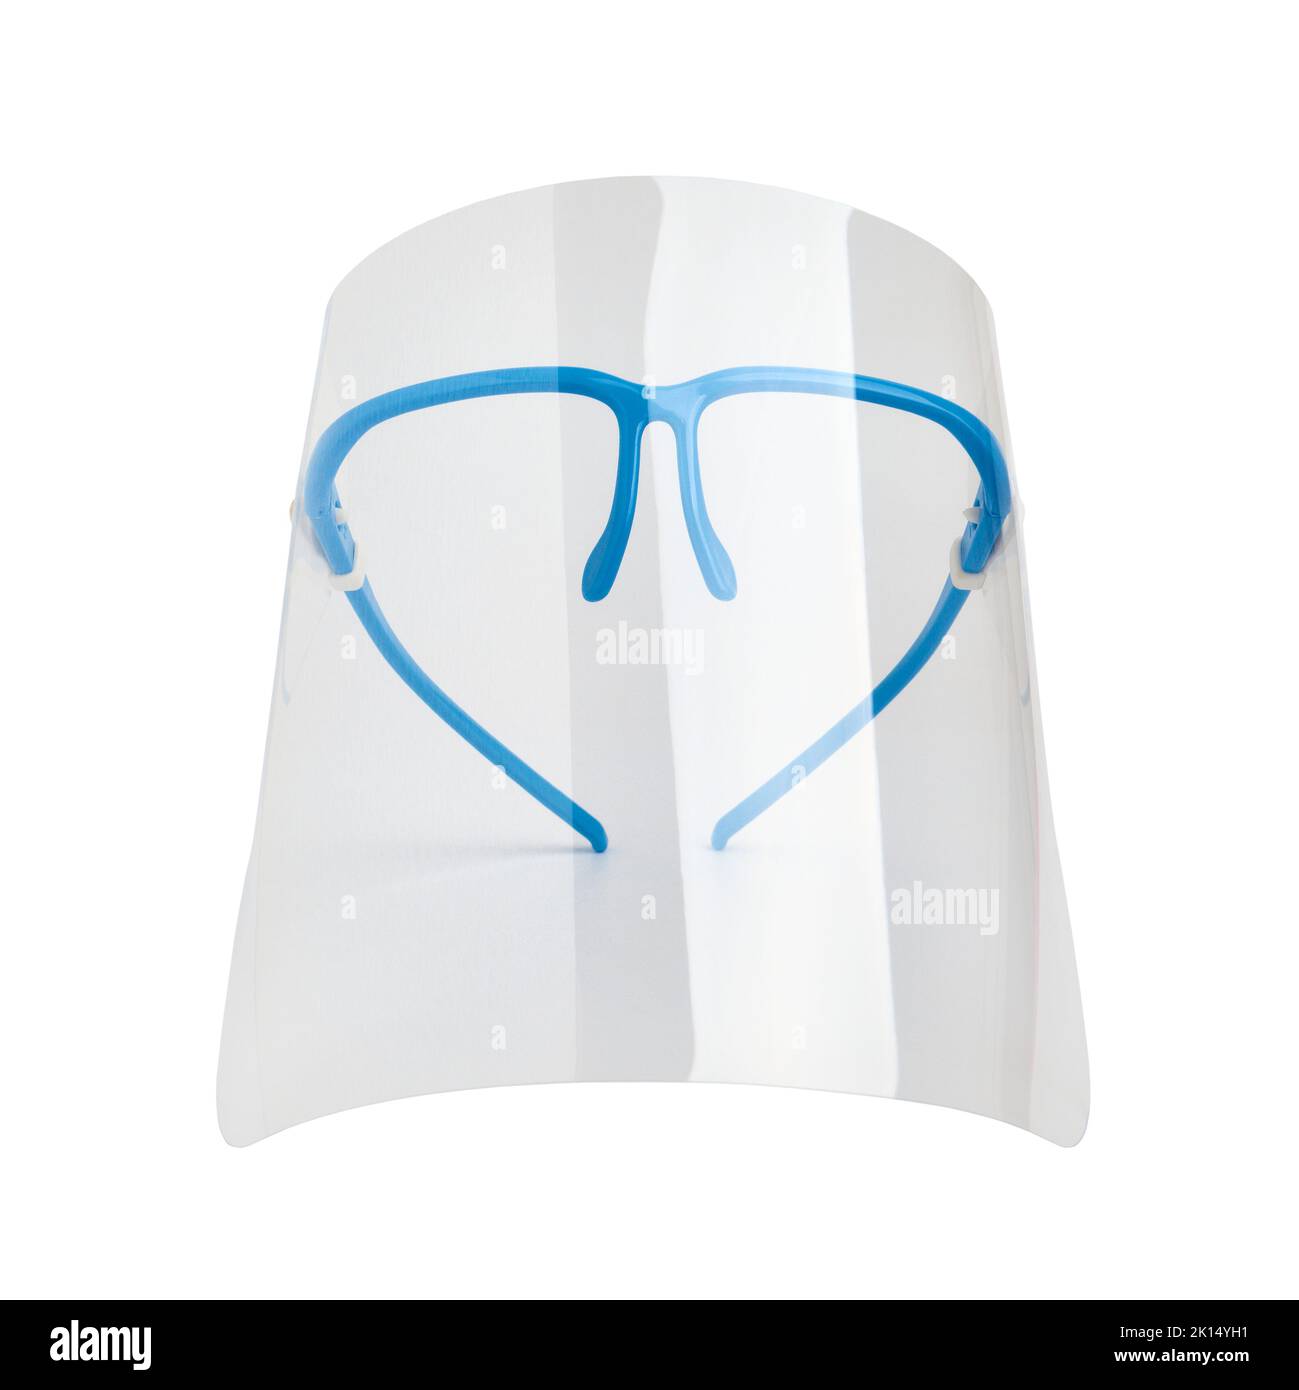 Medical Face Shield And Medical Mask For Protect Covid19 Doctor Mask  Transparent Plastic Mask Helmet Hat Epidemic Coronavirus Quarantine  Outbreak Concept Virus Outbreak Prevention Protection Stock Photo -  Download Image Now - iStock